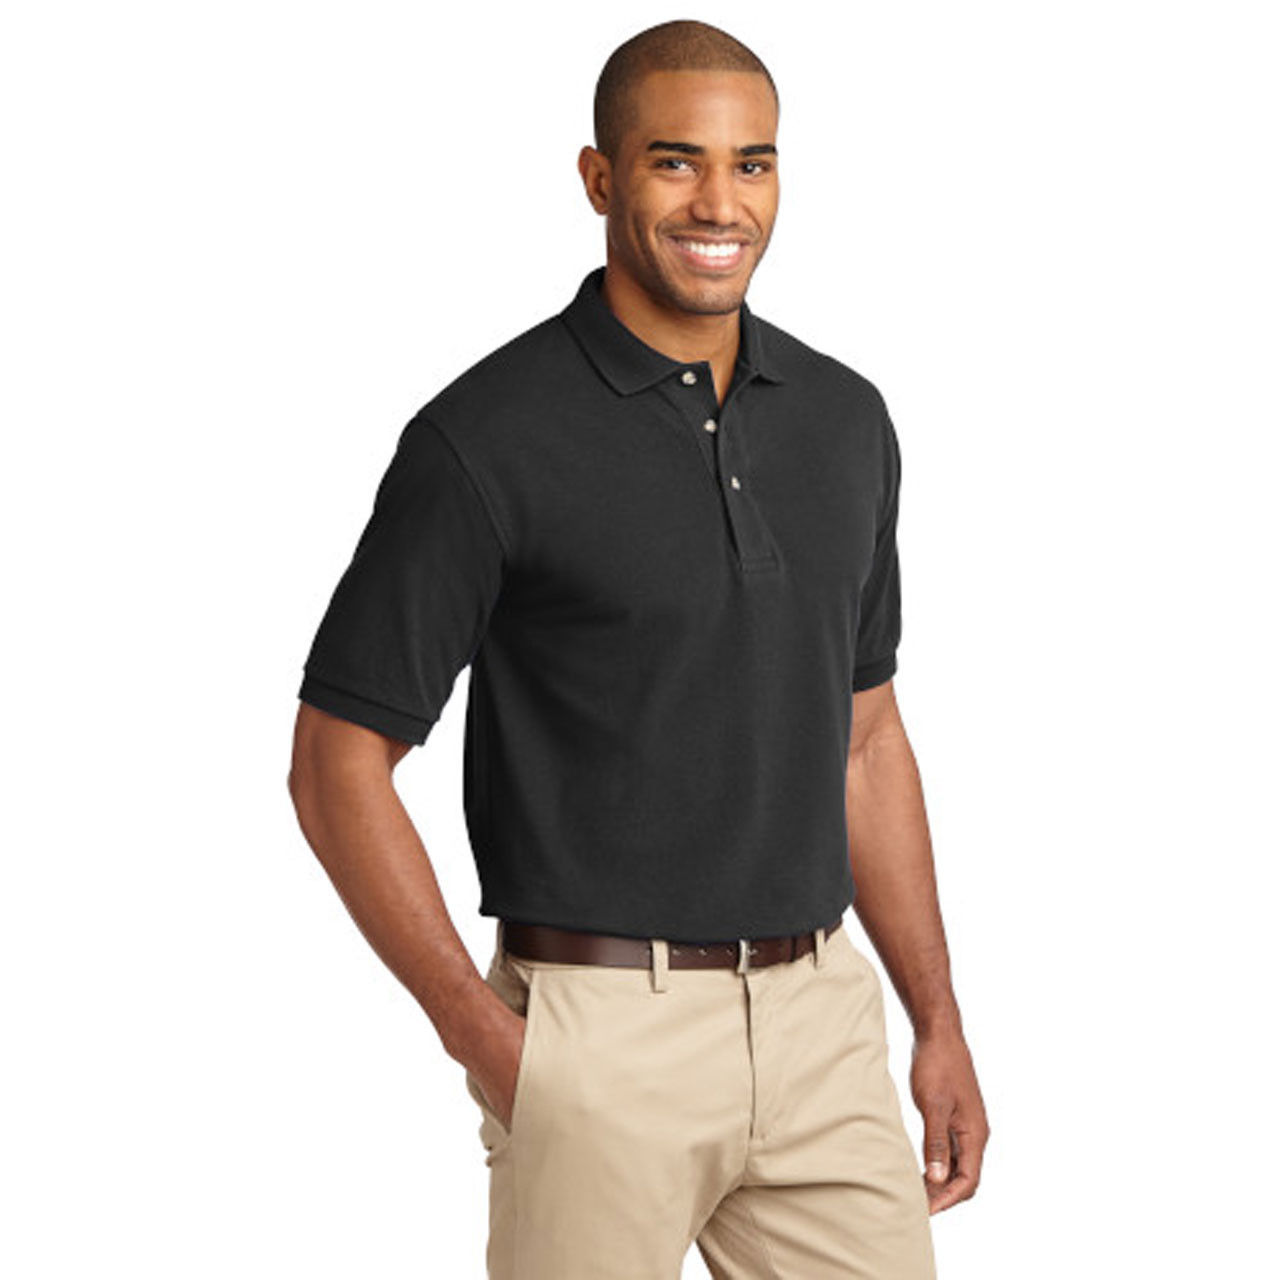 What benefits does the 100 cotton polo shirts wholesale offer in a bulk purchase?